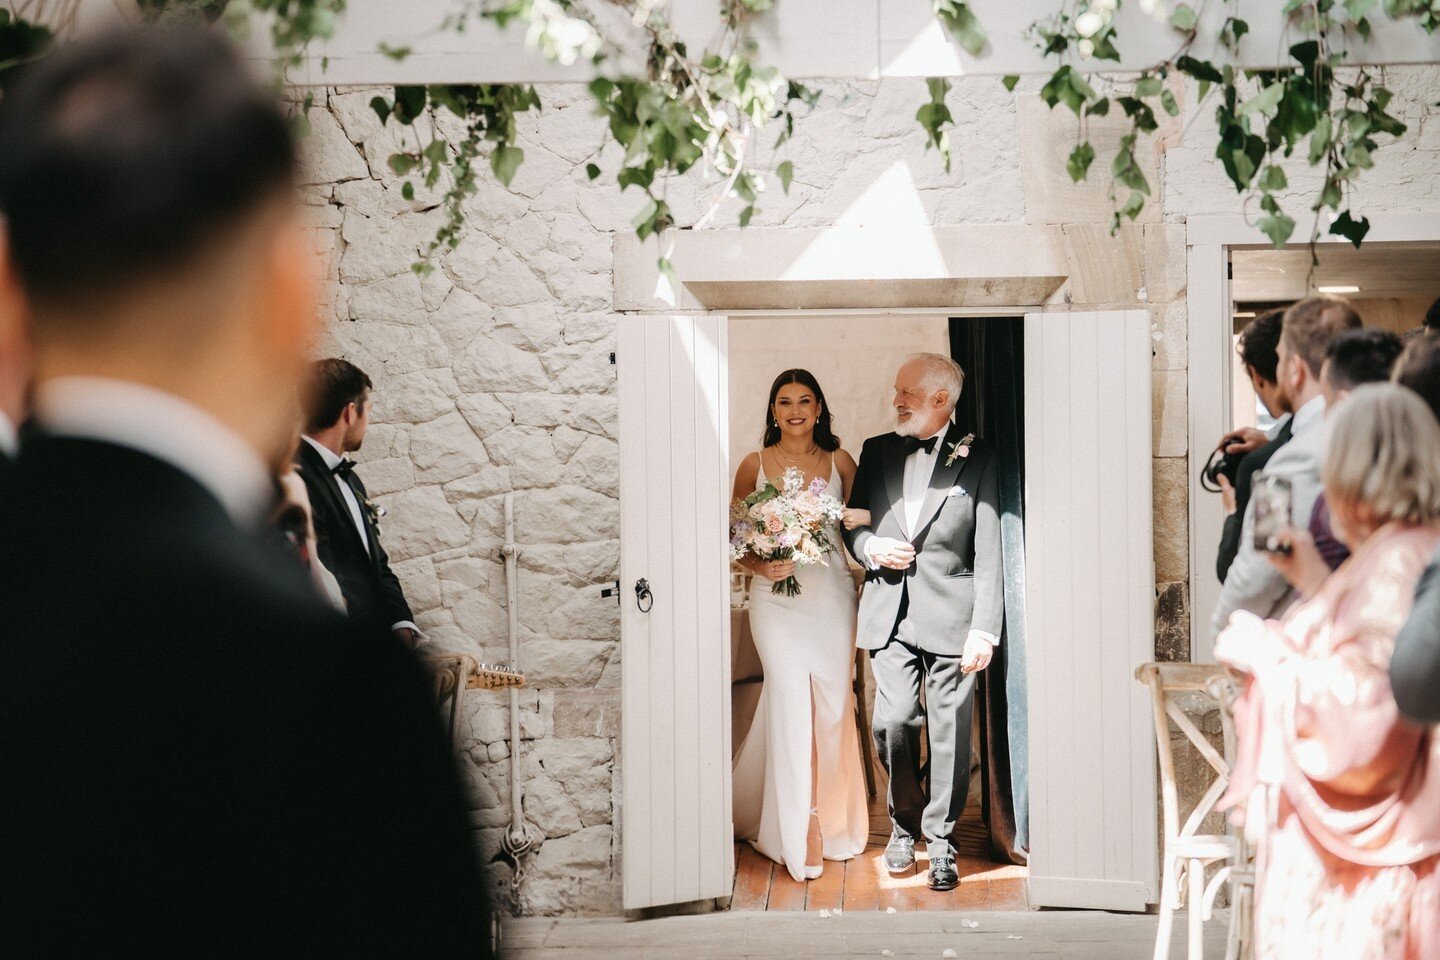 ᴛʜᴇ ᴍᴏᴍᴇɴᴛ ɪᴛ ᴀʟʟ ʙᴇᴄᴏᴍᴇs sᴏ ʀᴇᴀʟ. ⁠
⁠
Butterflies, first looks and a room filled with love. We just adore these first moments as our couples reunite in our Ceremony Barn. ⁠
⁠
📸 @scottandlees⁠
.⁠
.⁠
.⁠
.⁠
.⁠
⁠
#wyresdale #wyresdaleweddings #weddings